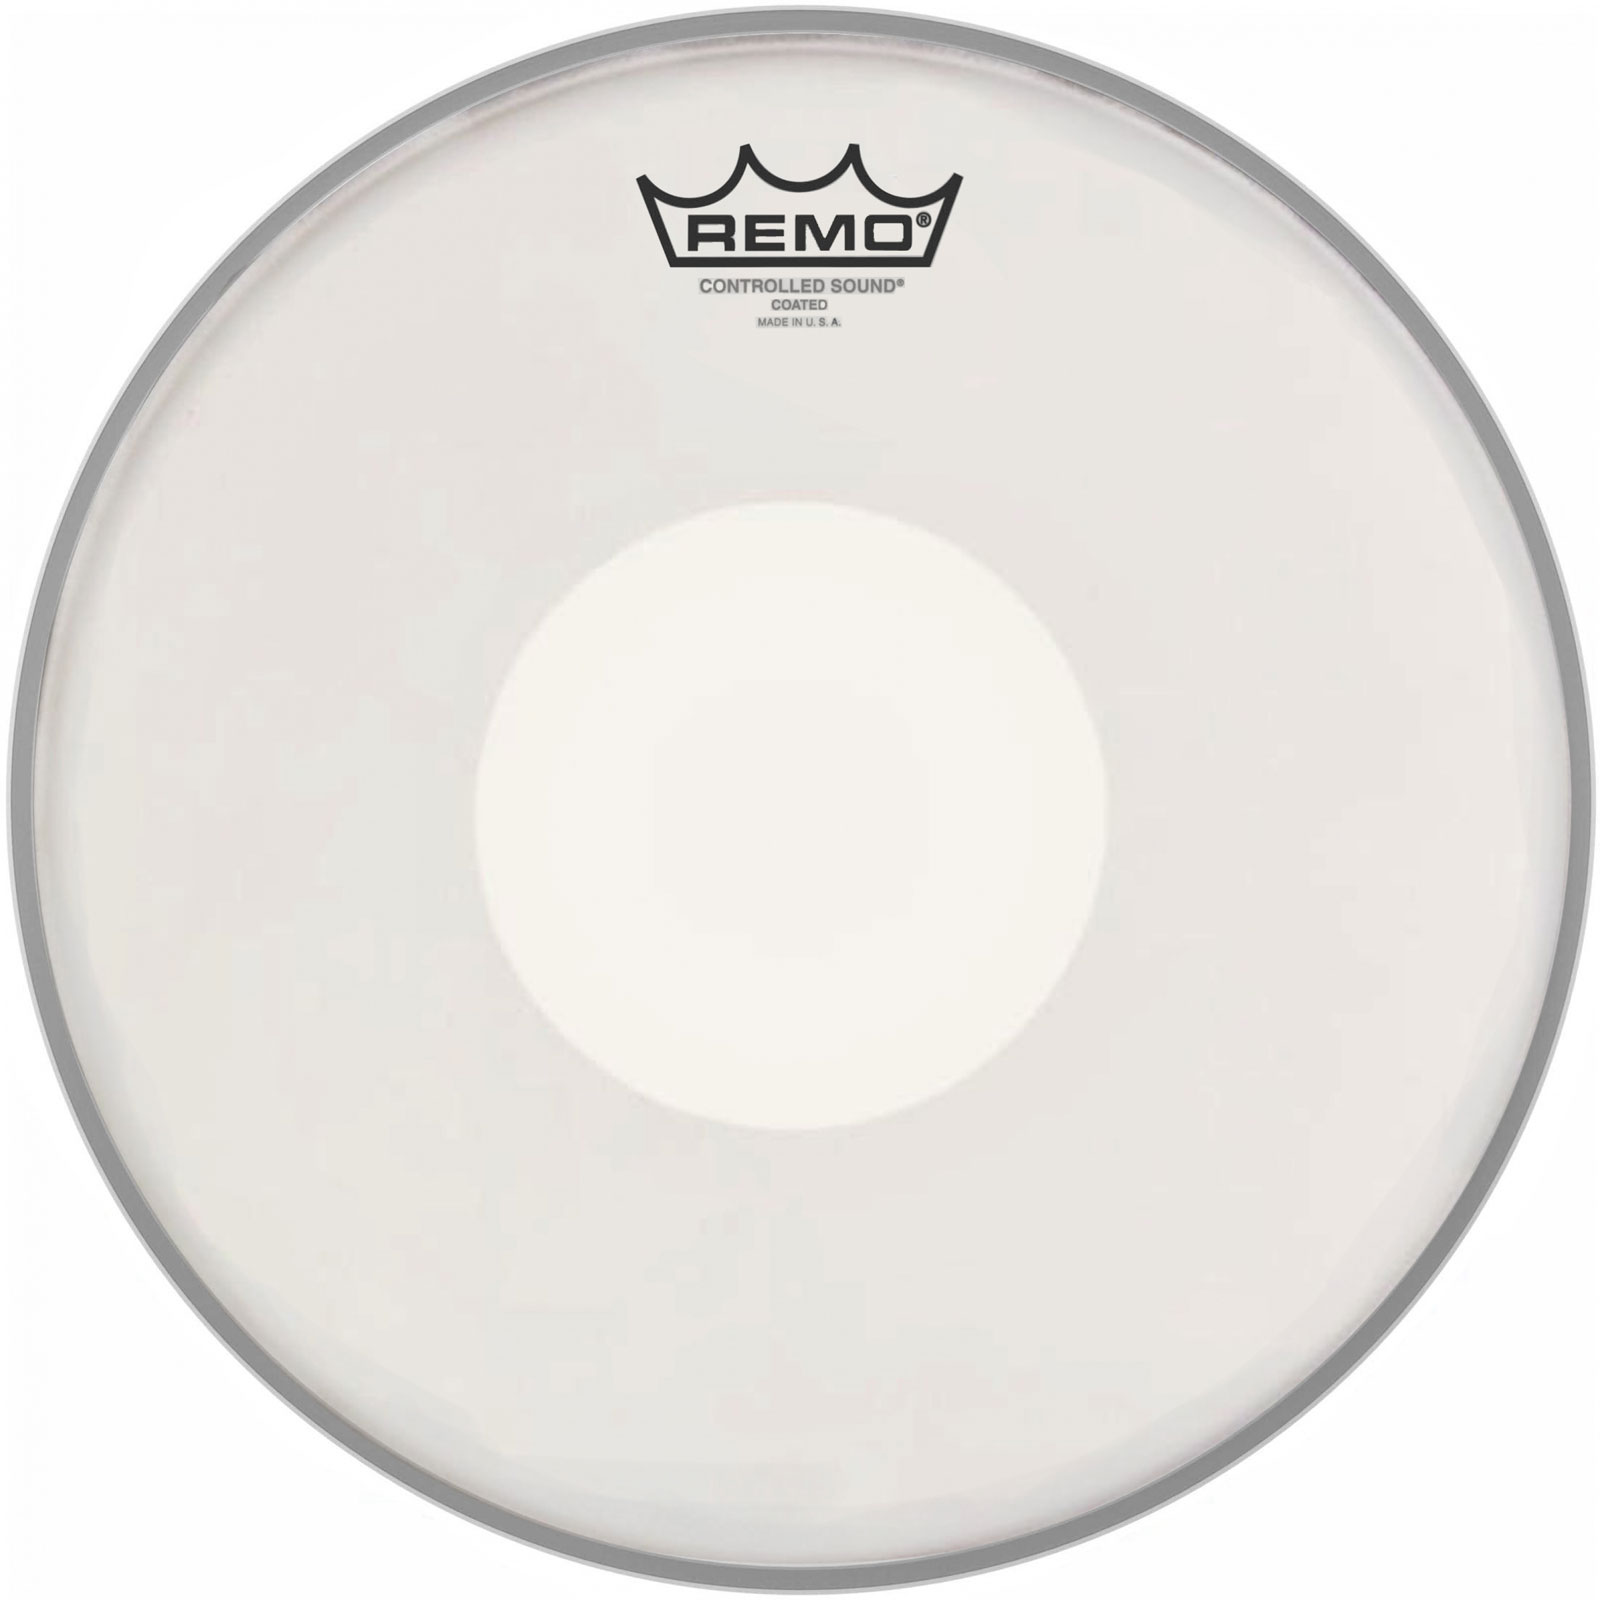 REMO CS-0113-00 - CONTROLLED SOUND COATED WHITE DOT 13